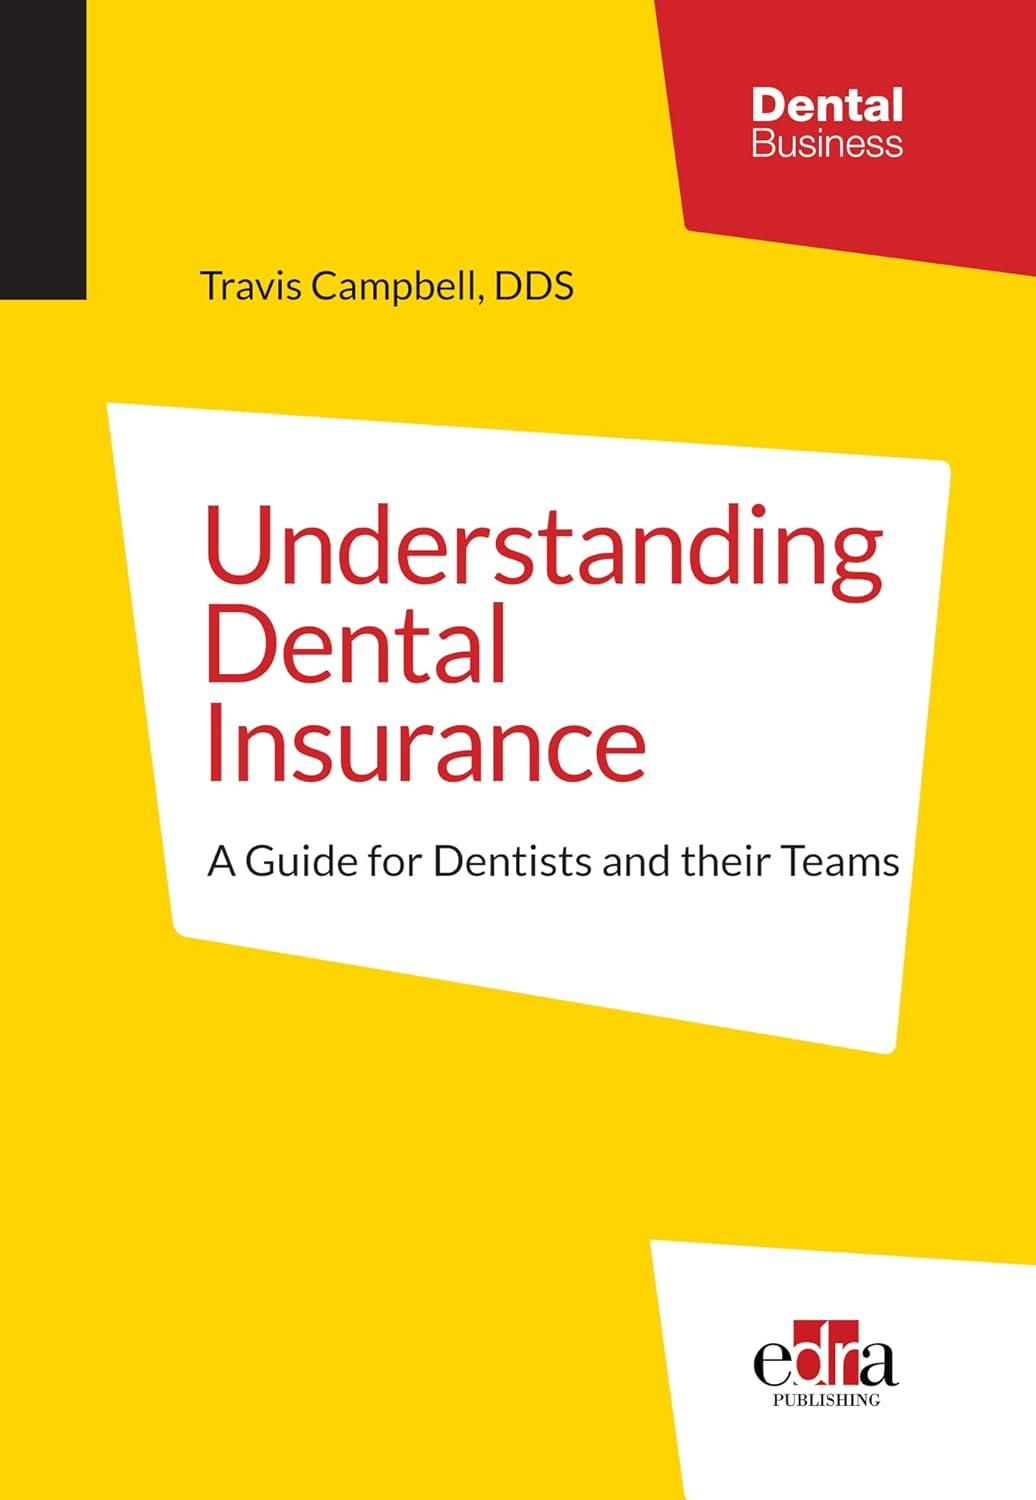 understanding dental insurance: a guide for dentists and their teams 1st edition travis campbell 1735149756,